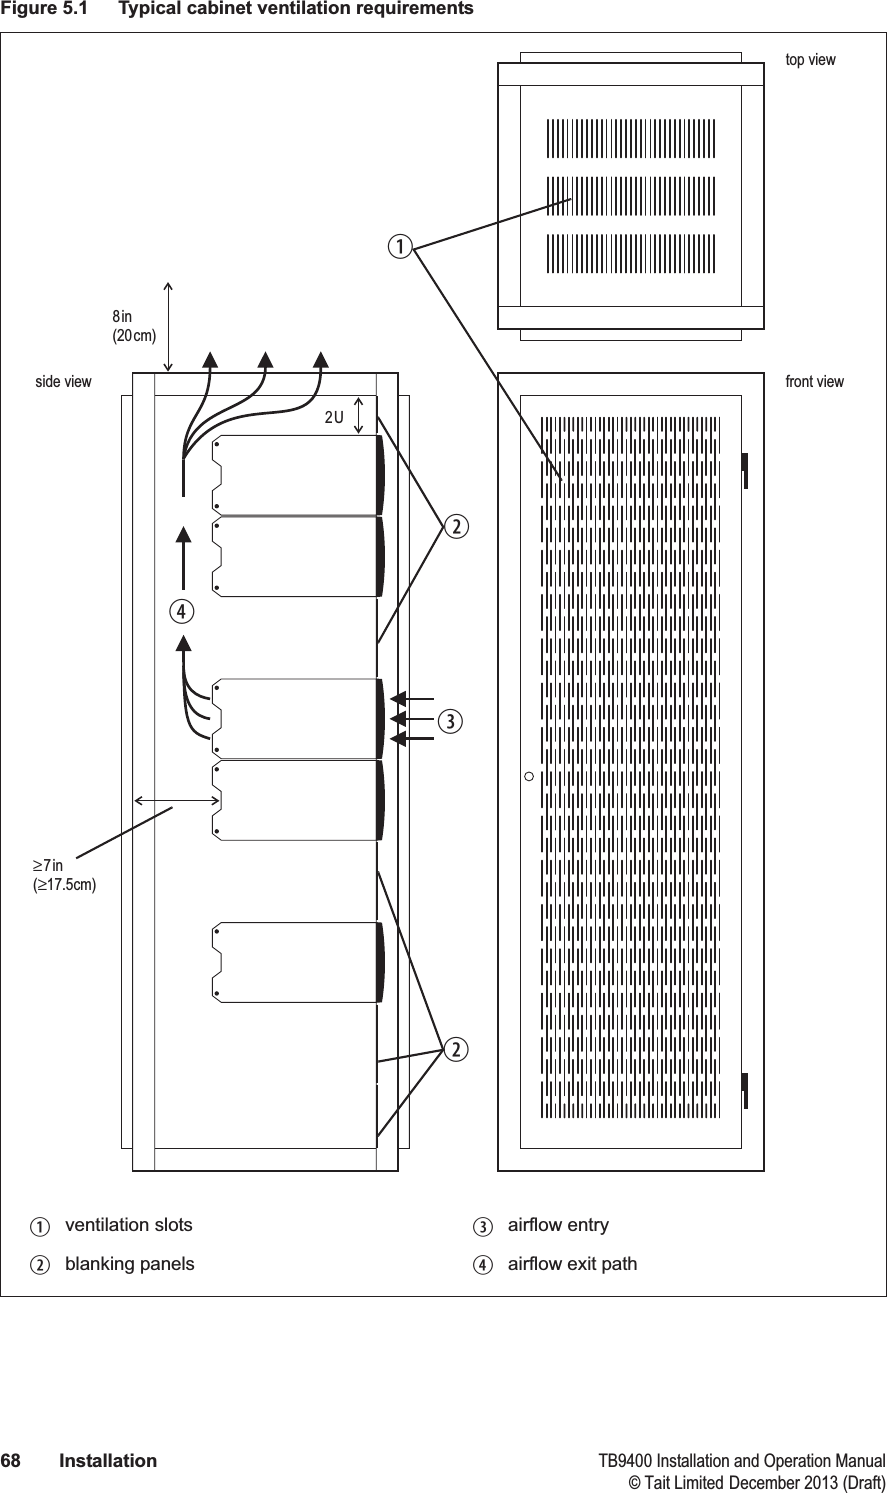  68 Installation TB9400 Installation and Operation Manual© Tait Limited December 2013 (Draft)Figure 5.1 Typical cabinet ventilation requirementsbventilation slots dairflow entrycblanking panels eairflow exit path8in(20cm)2U≥7in(≥17.5cm)side view front viewtop viewccdeb